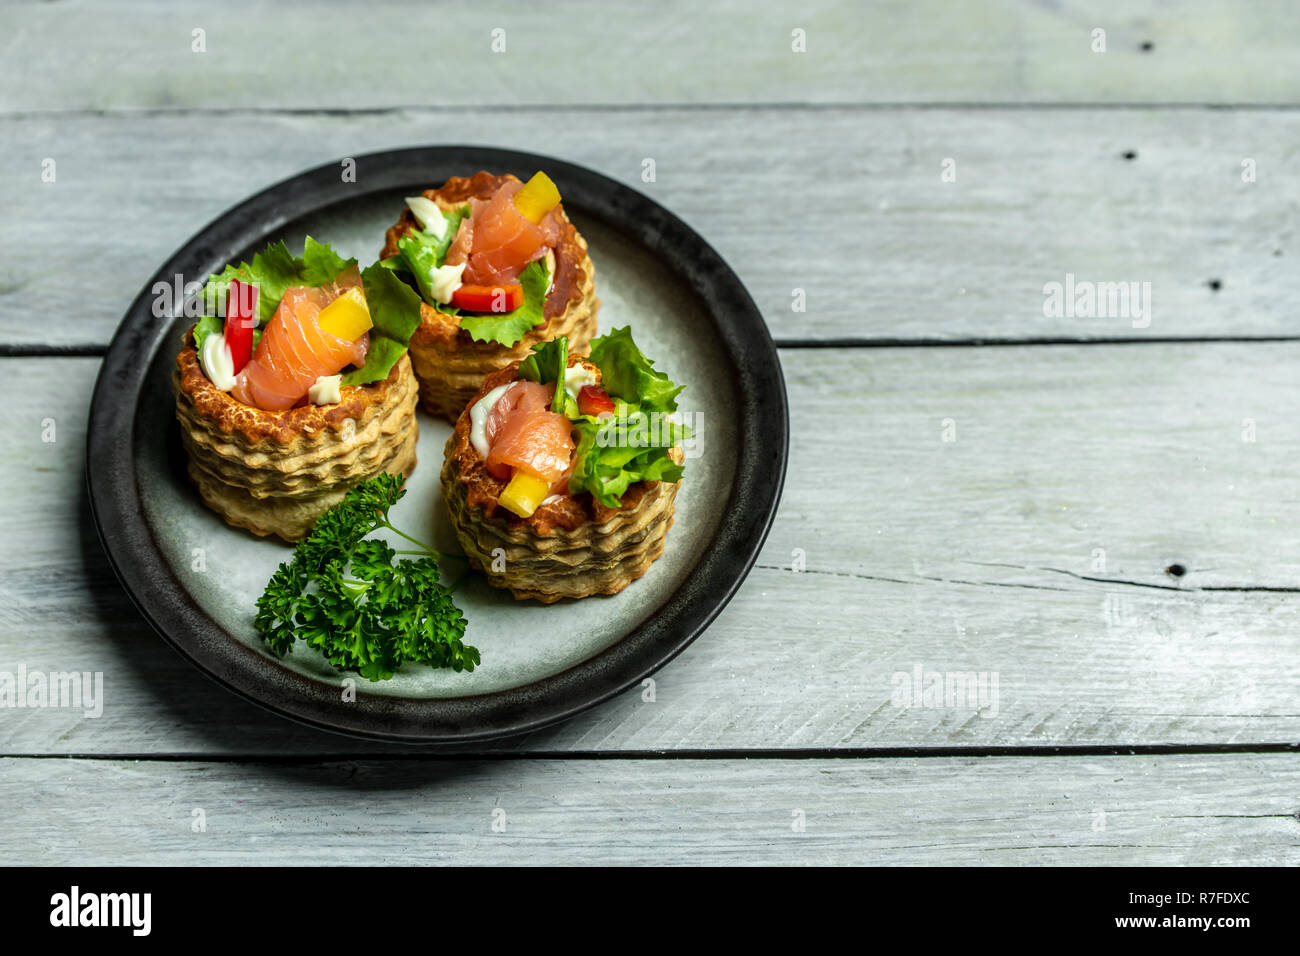 French cuisine, crunchy patties with lettuce and smoked salmon on a bright, rustic background Stock Photo